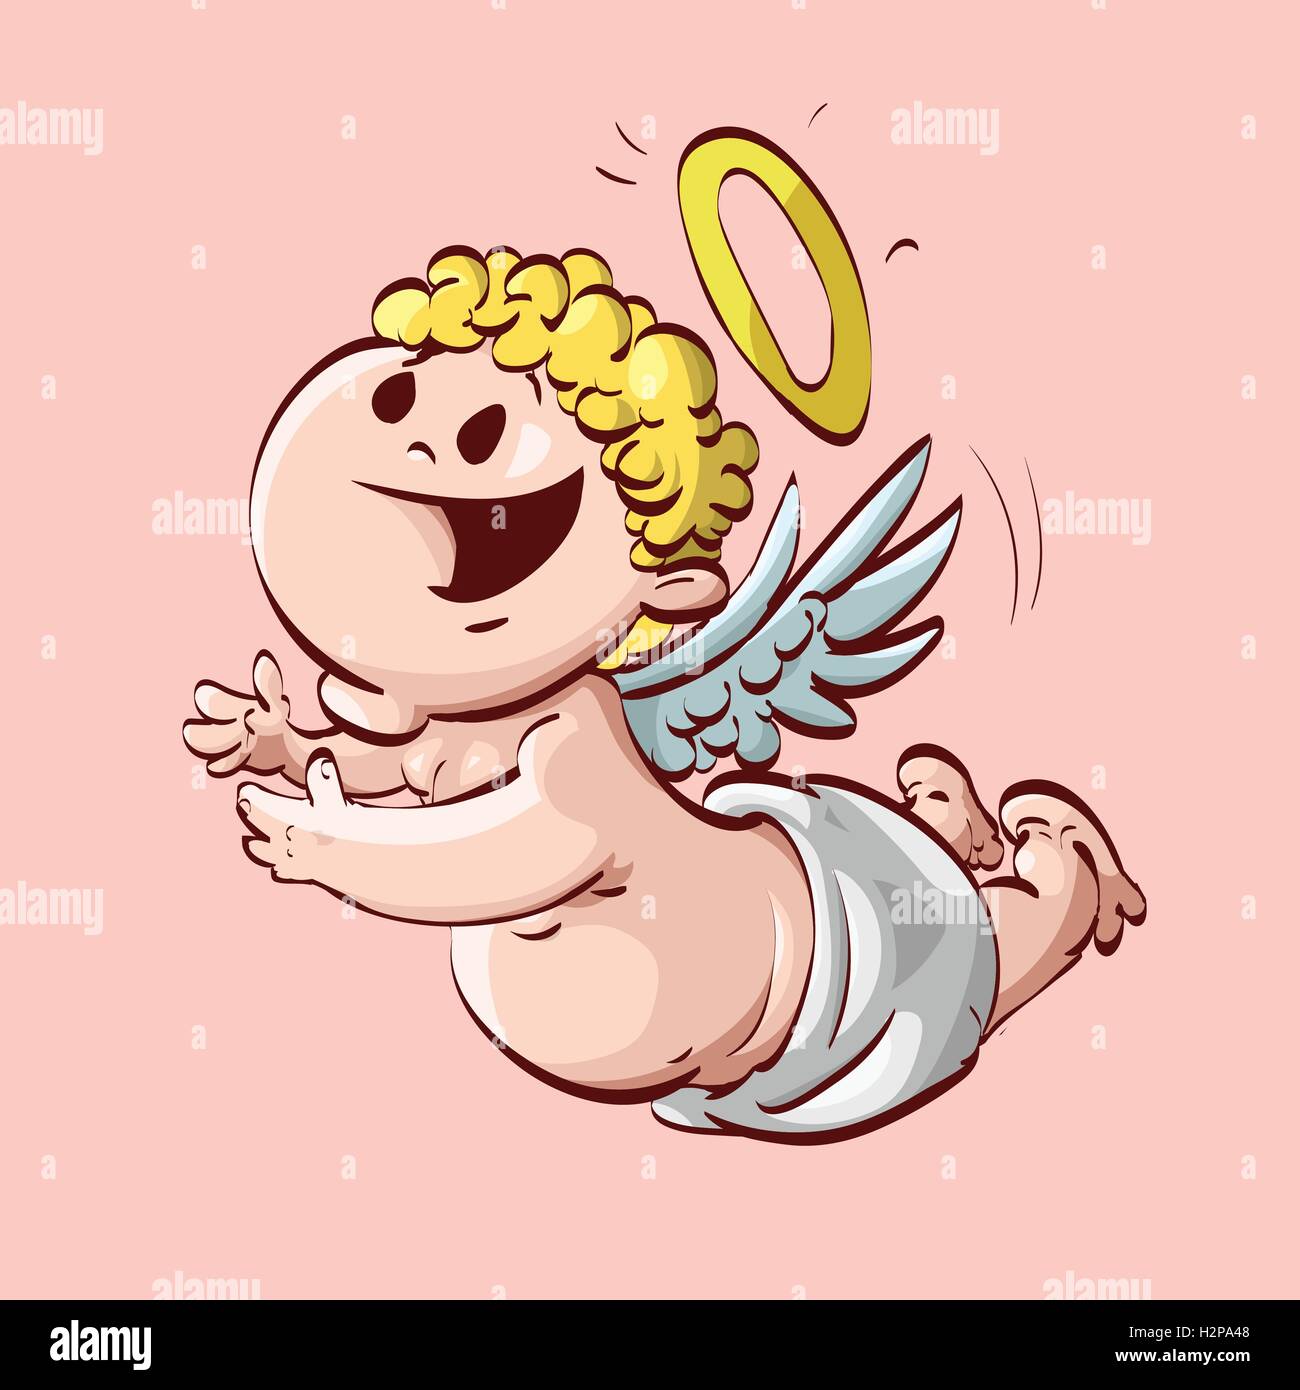 Colorful vector illustration of a baby angel flying with hands forward and wearing diaper. Stock Vector